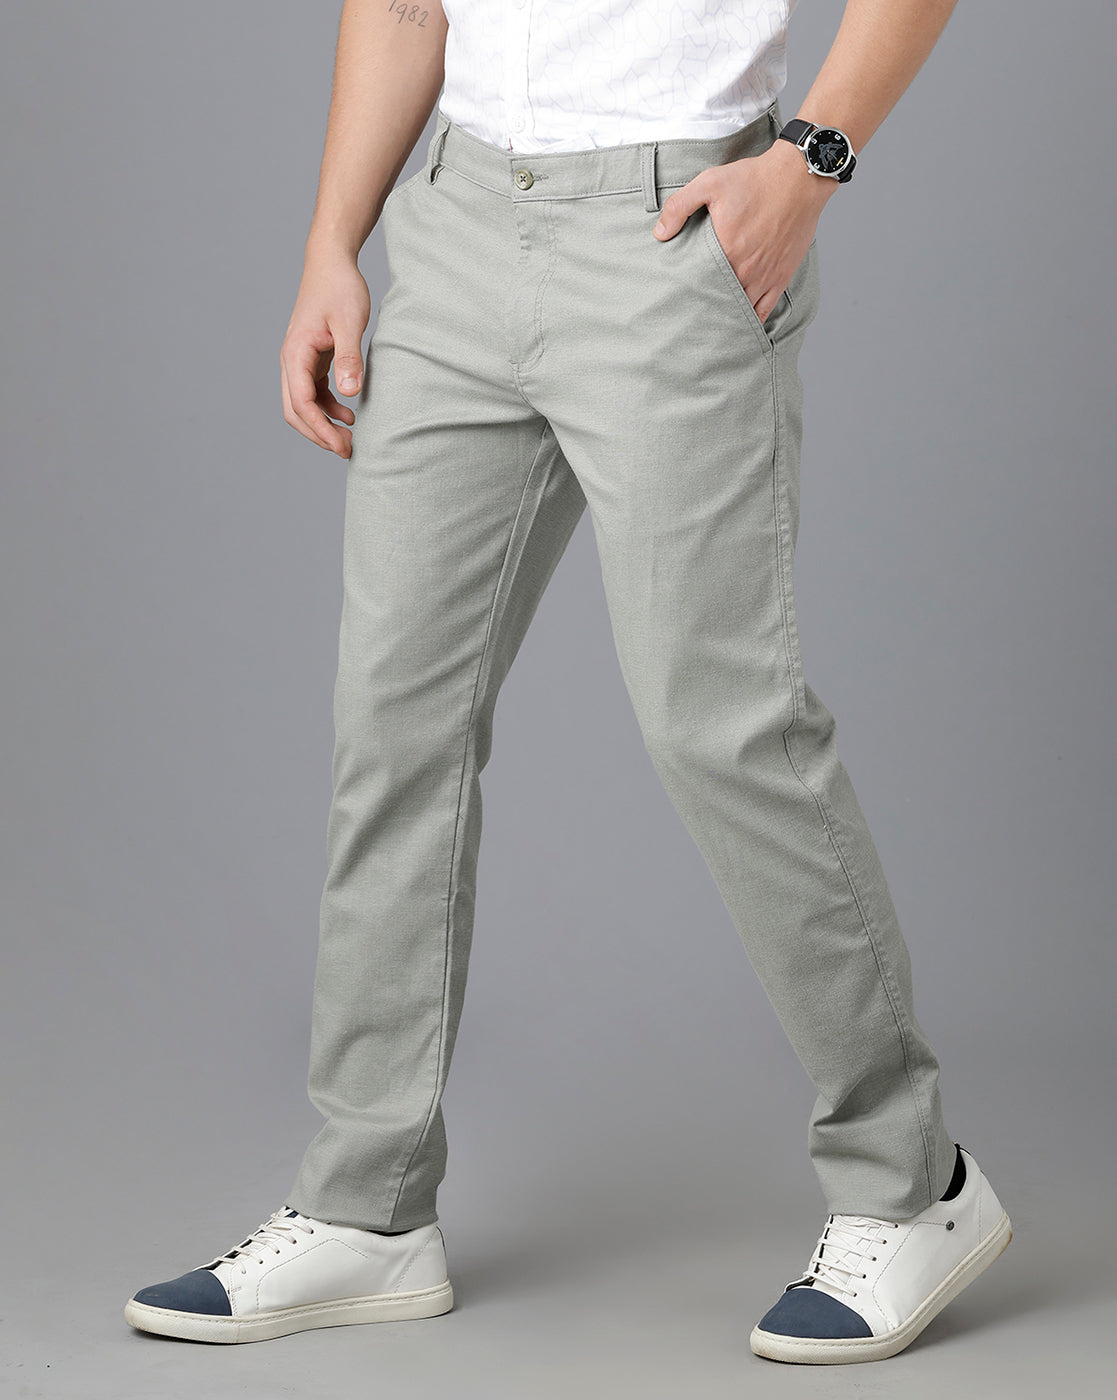 Solid Color Cotton Pant in Olive Green  TJA948